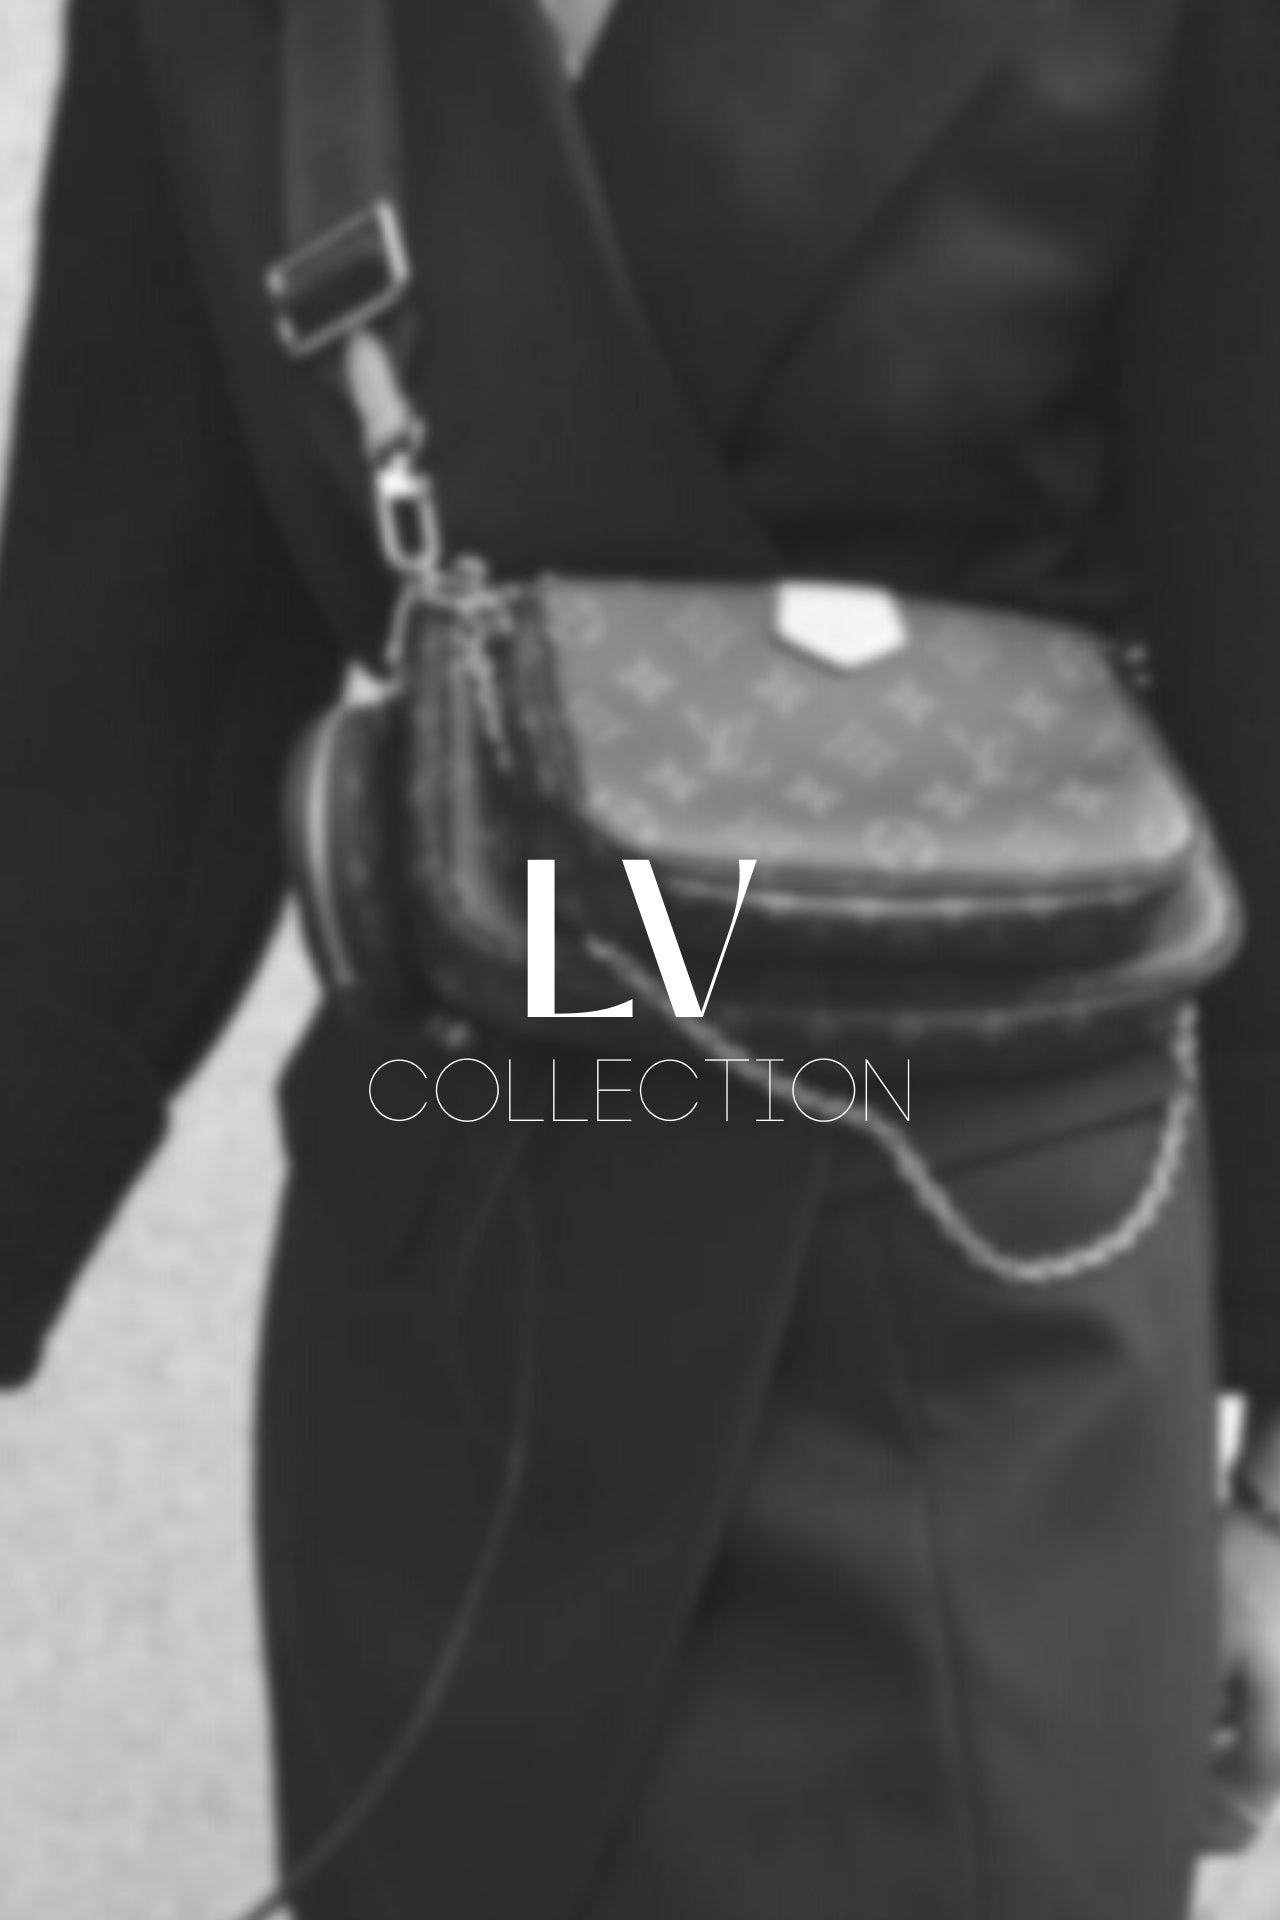 LV Collection